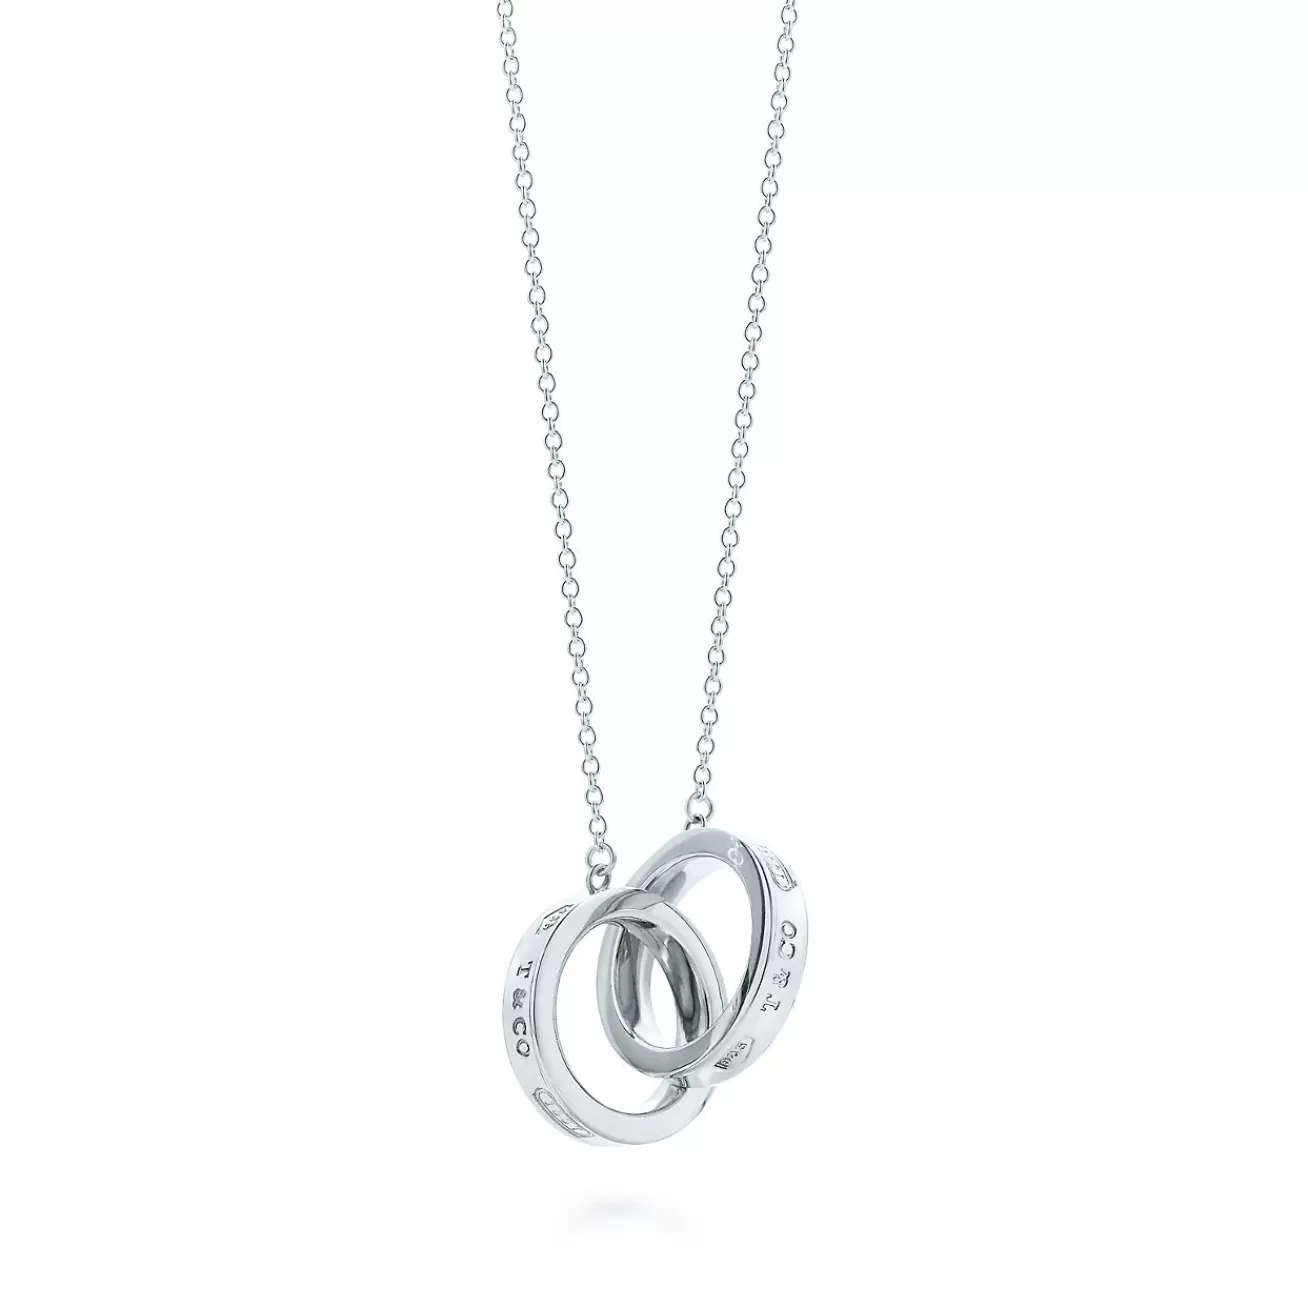 Tiffany & Co. Tiffany 1837™ interlocking circles pendant in sterling silver. | ^ Necklaces & Pendants | Gifts for Her